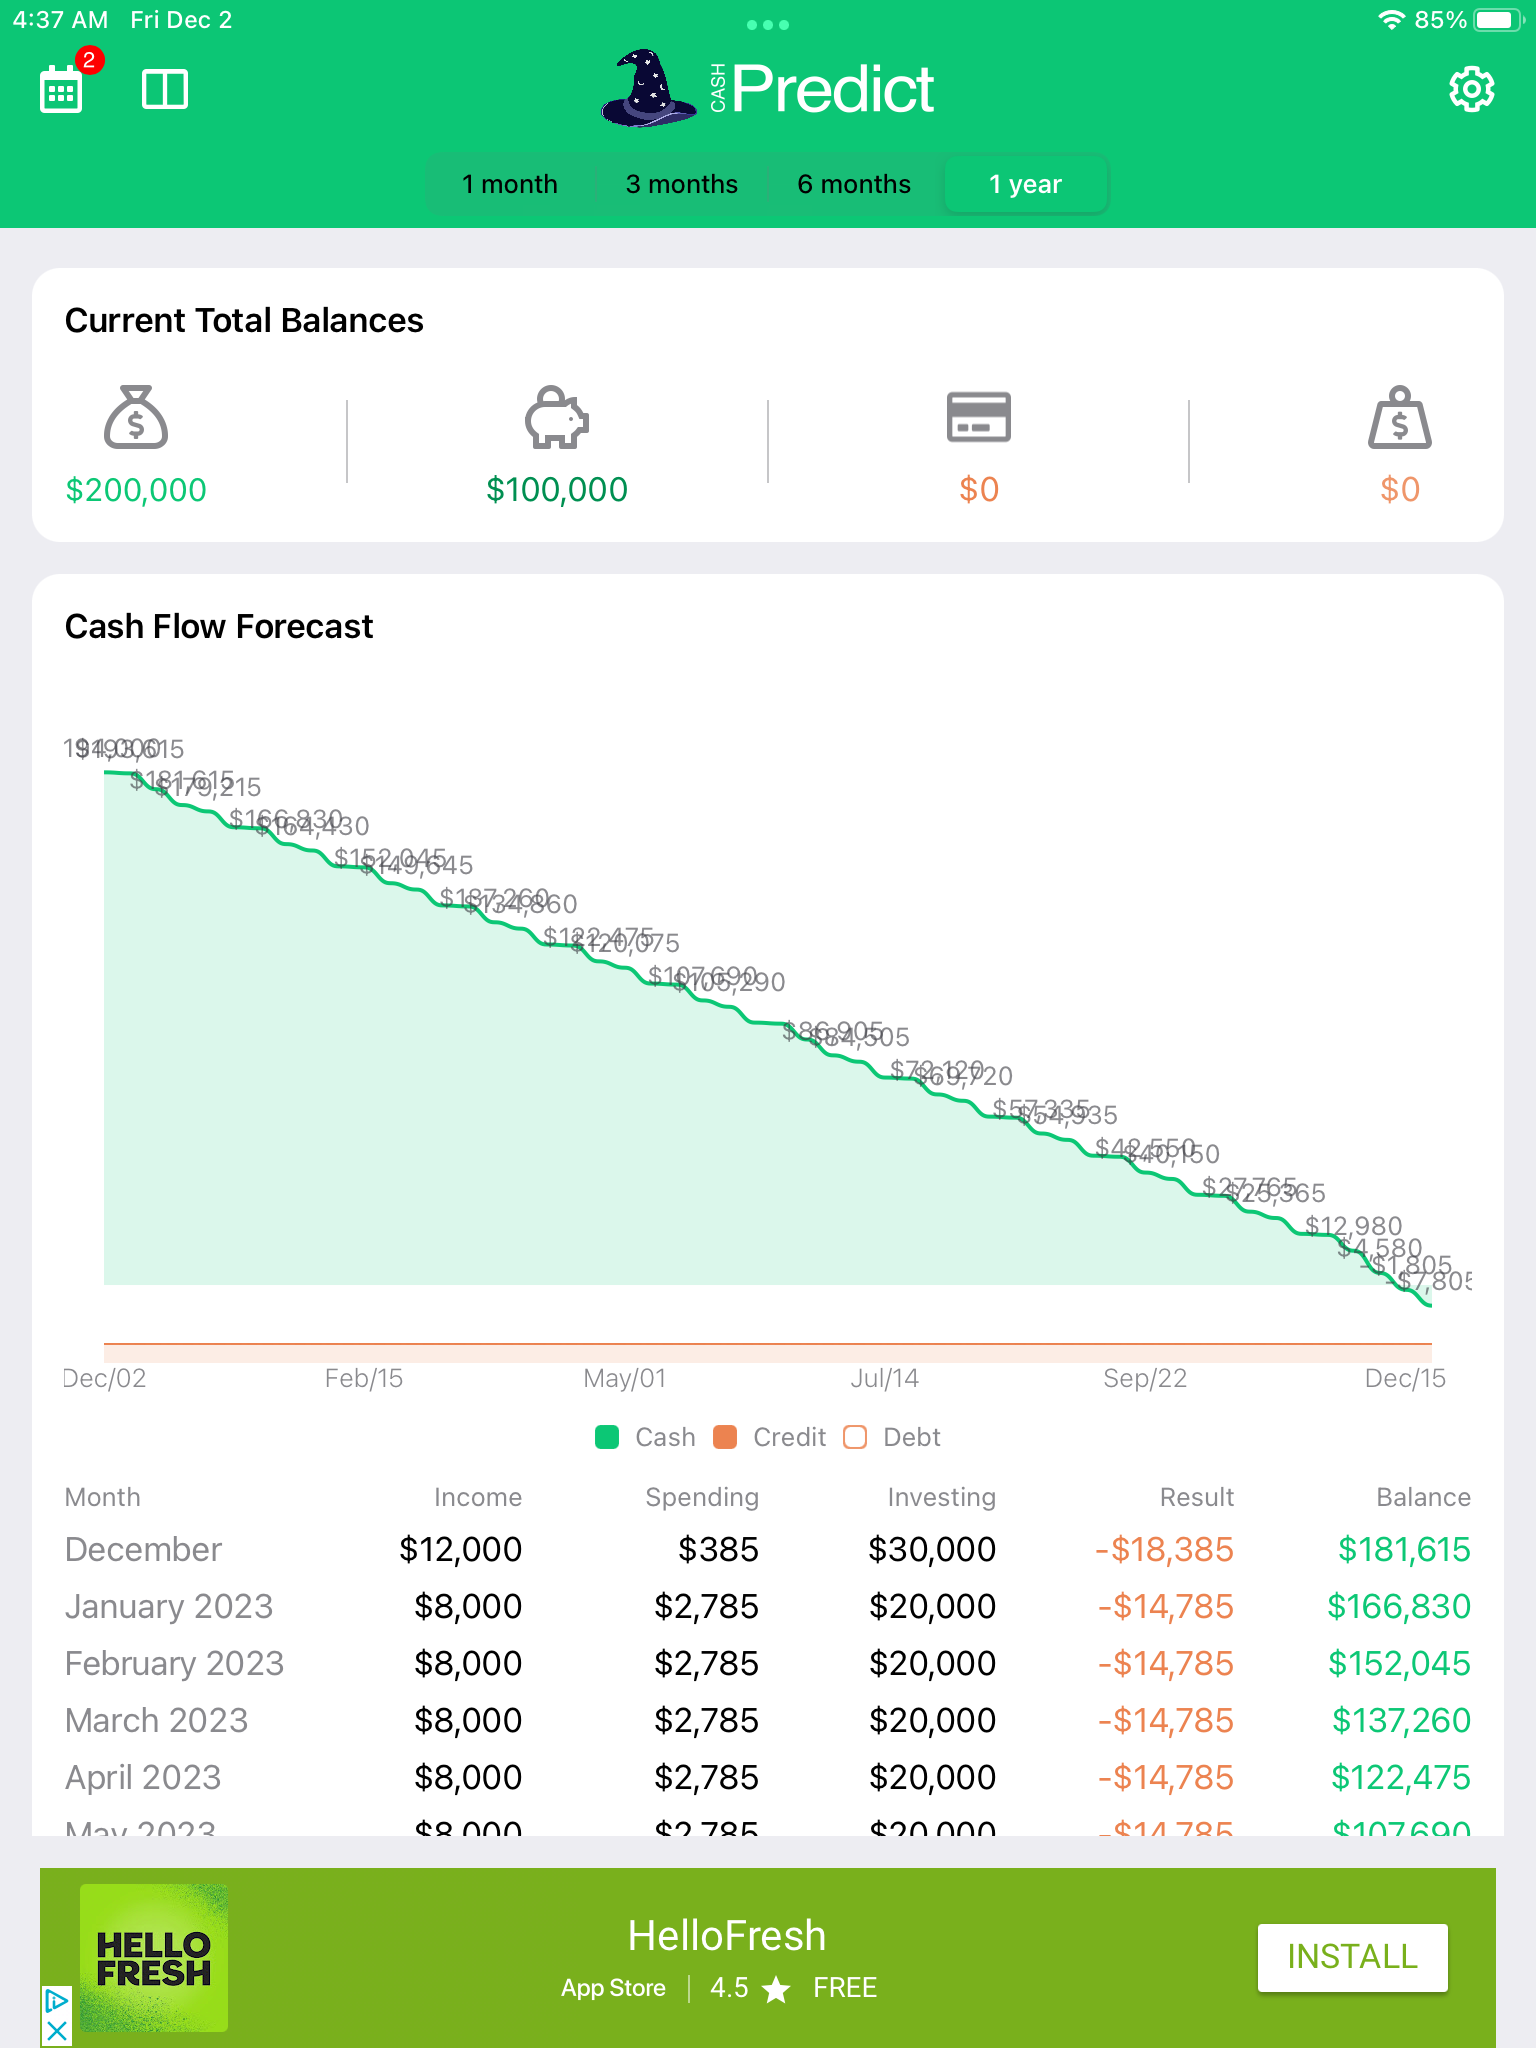 Cash Predict | Forecast | GiveMeAppps